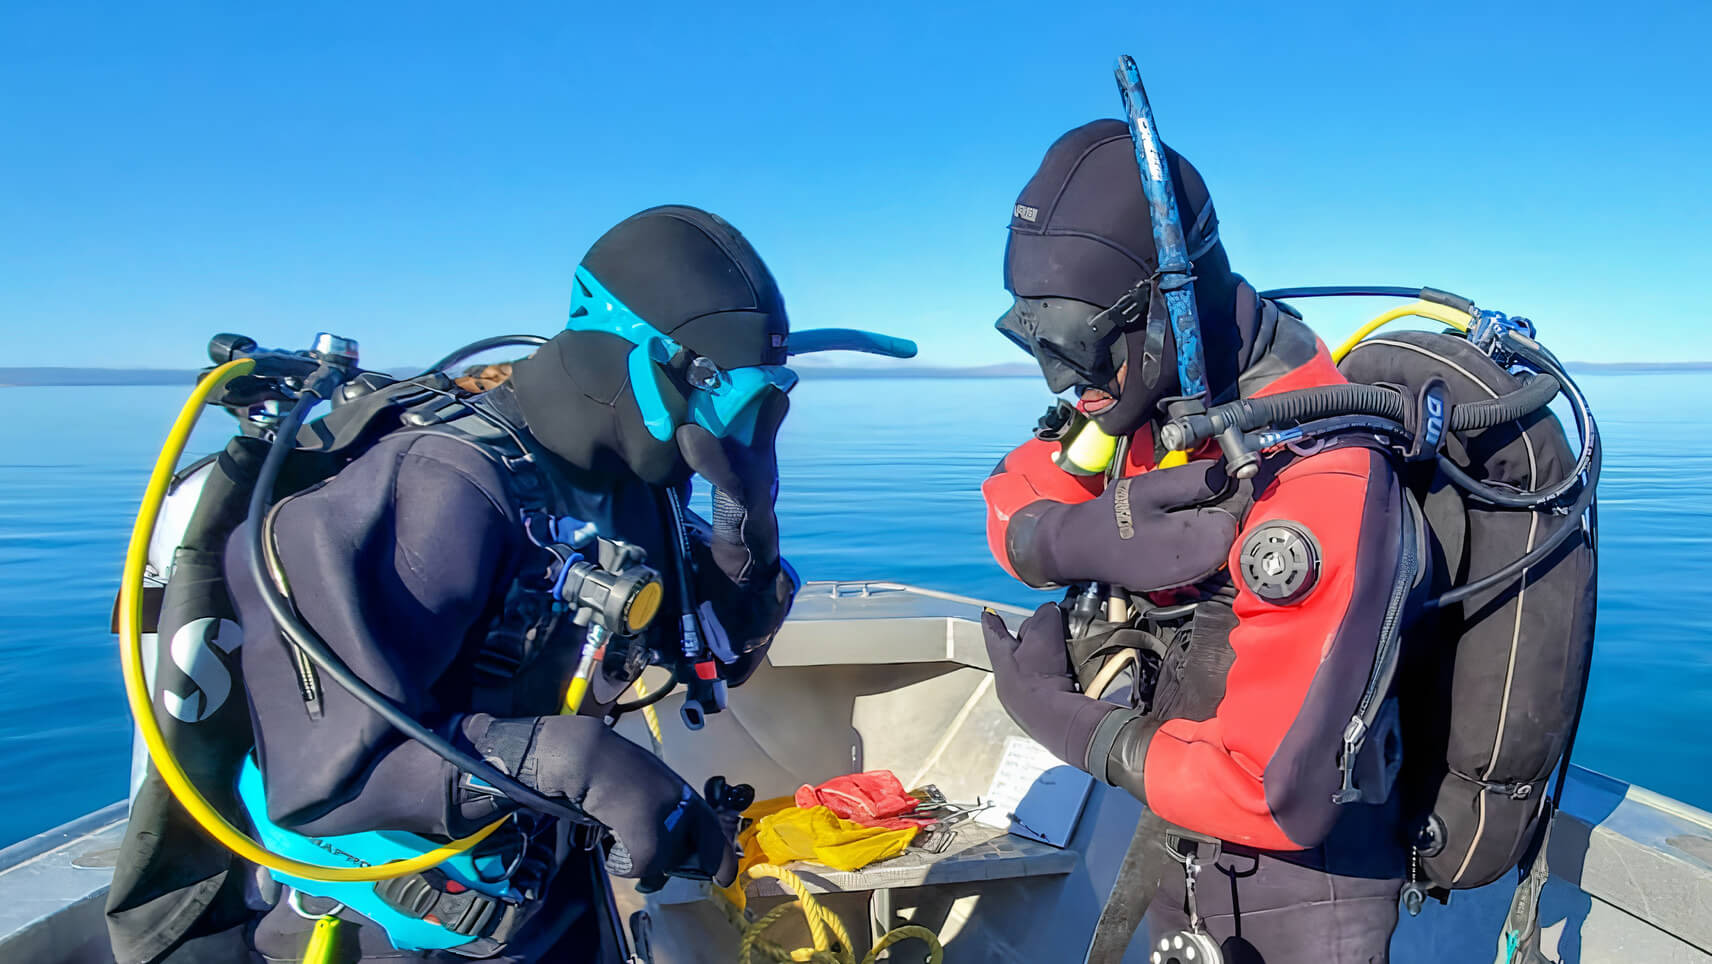 Researchers dive for kelp in the Arctic